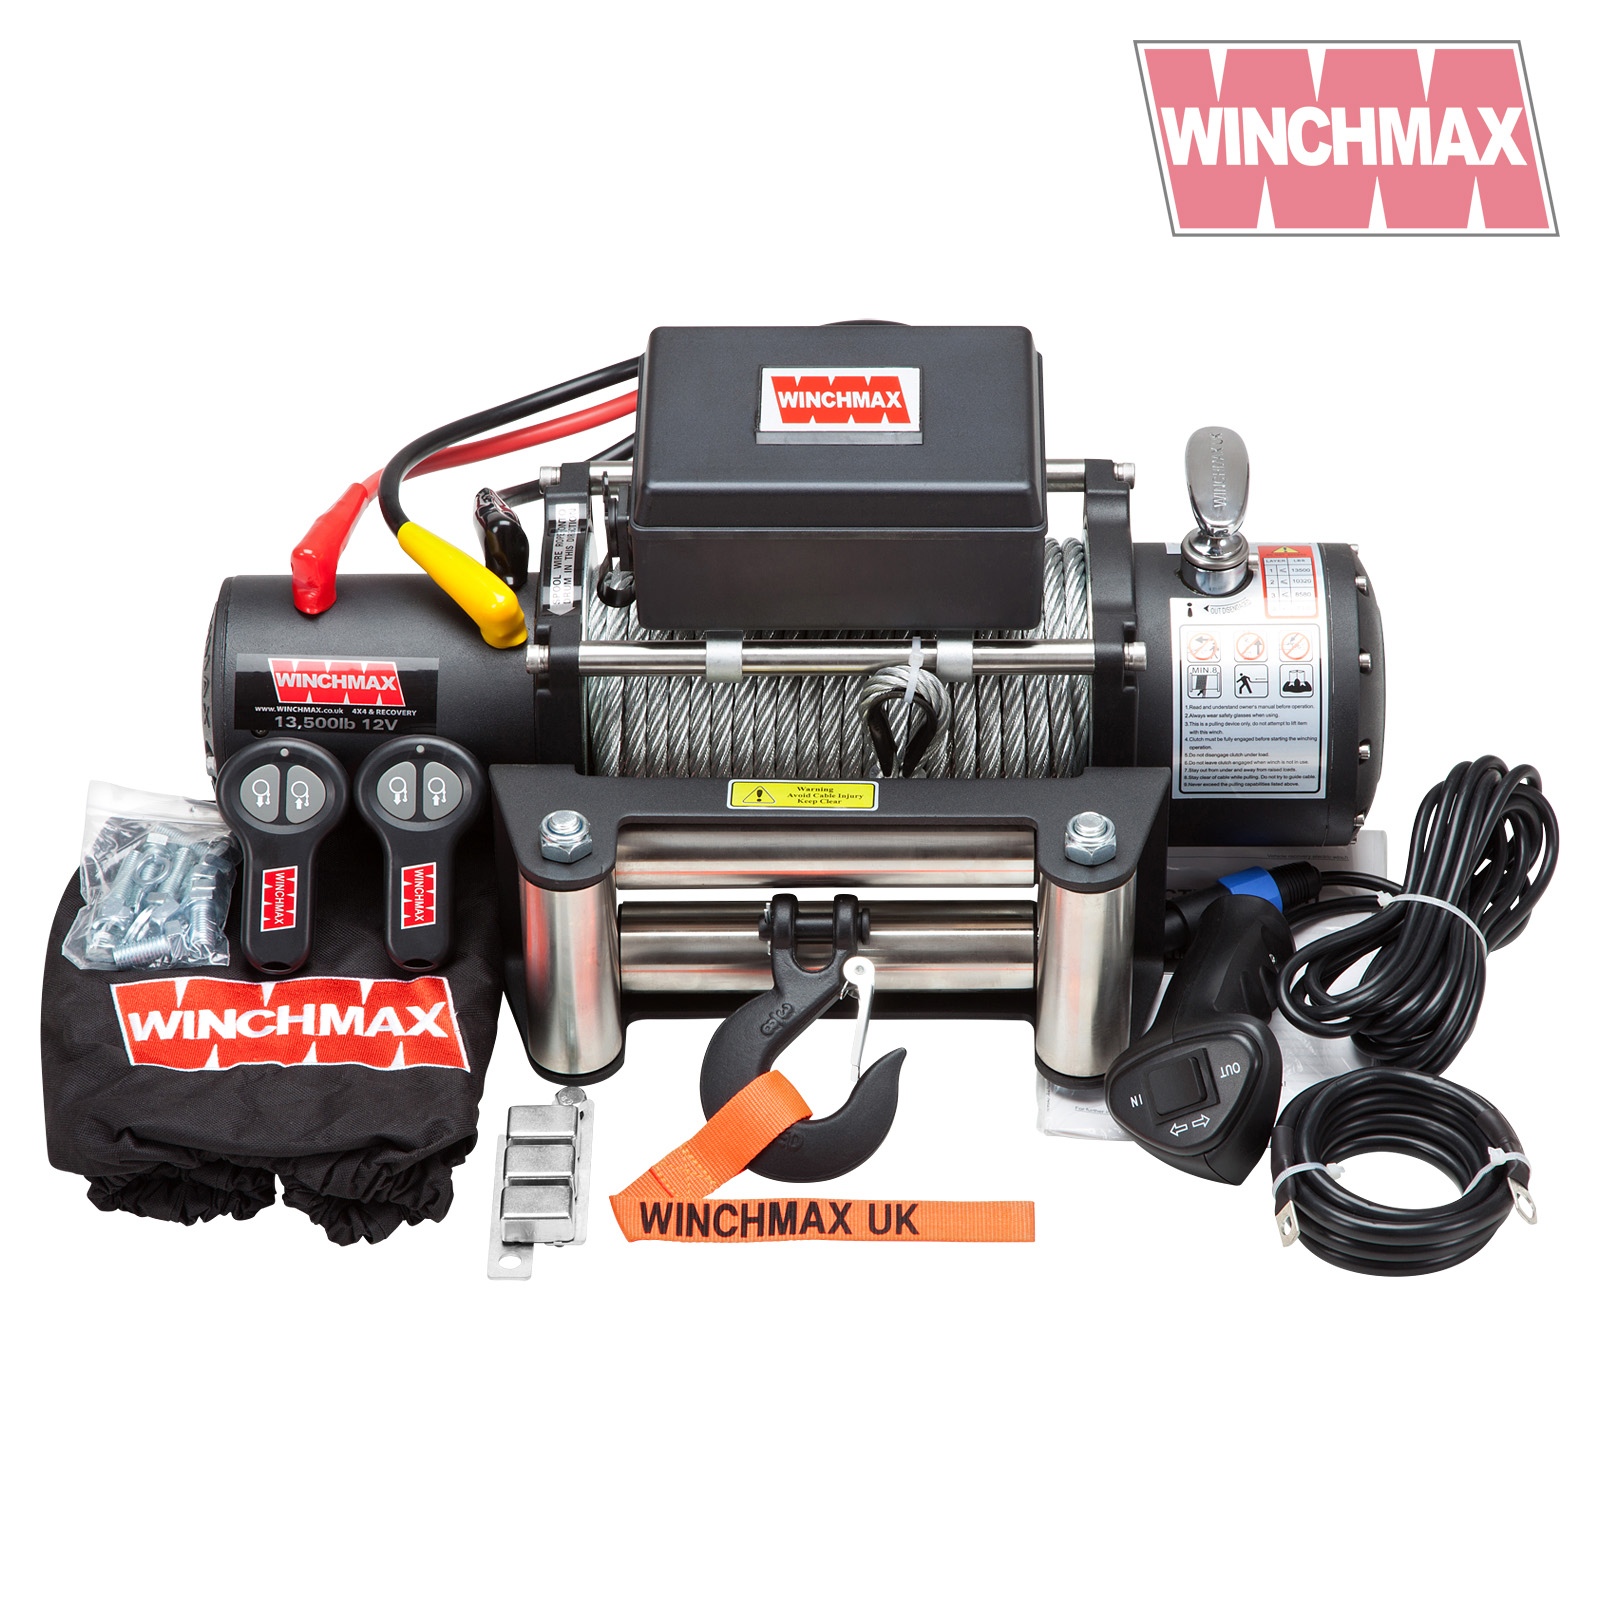 Winchmax 13500lb 12v Military Grade Winch. Steel Rope and Twin Wireless Remote Controls